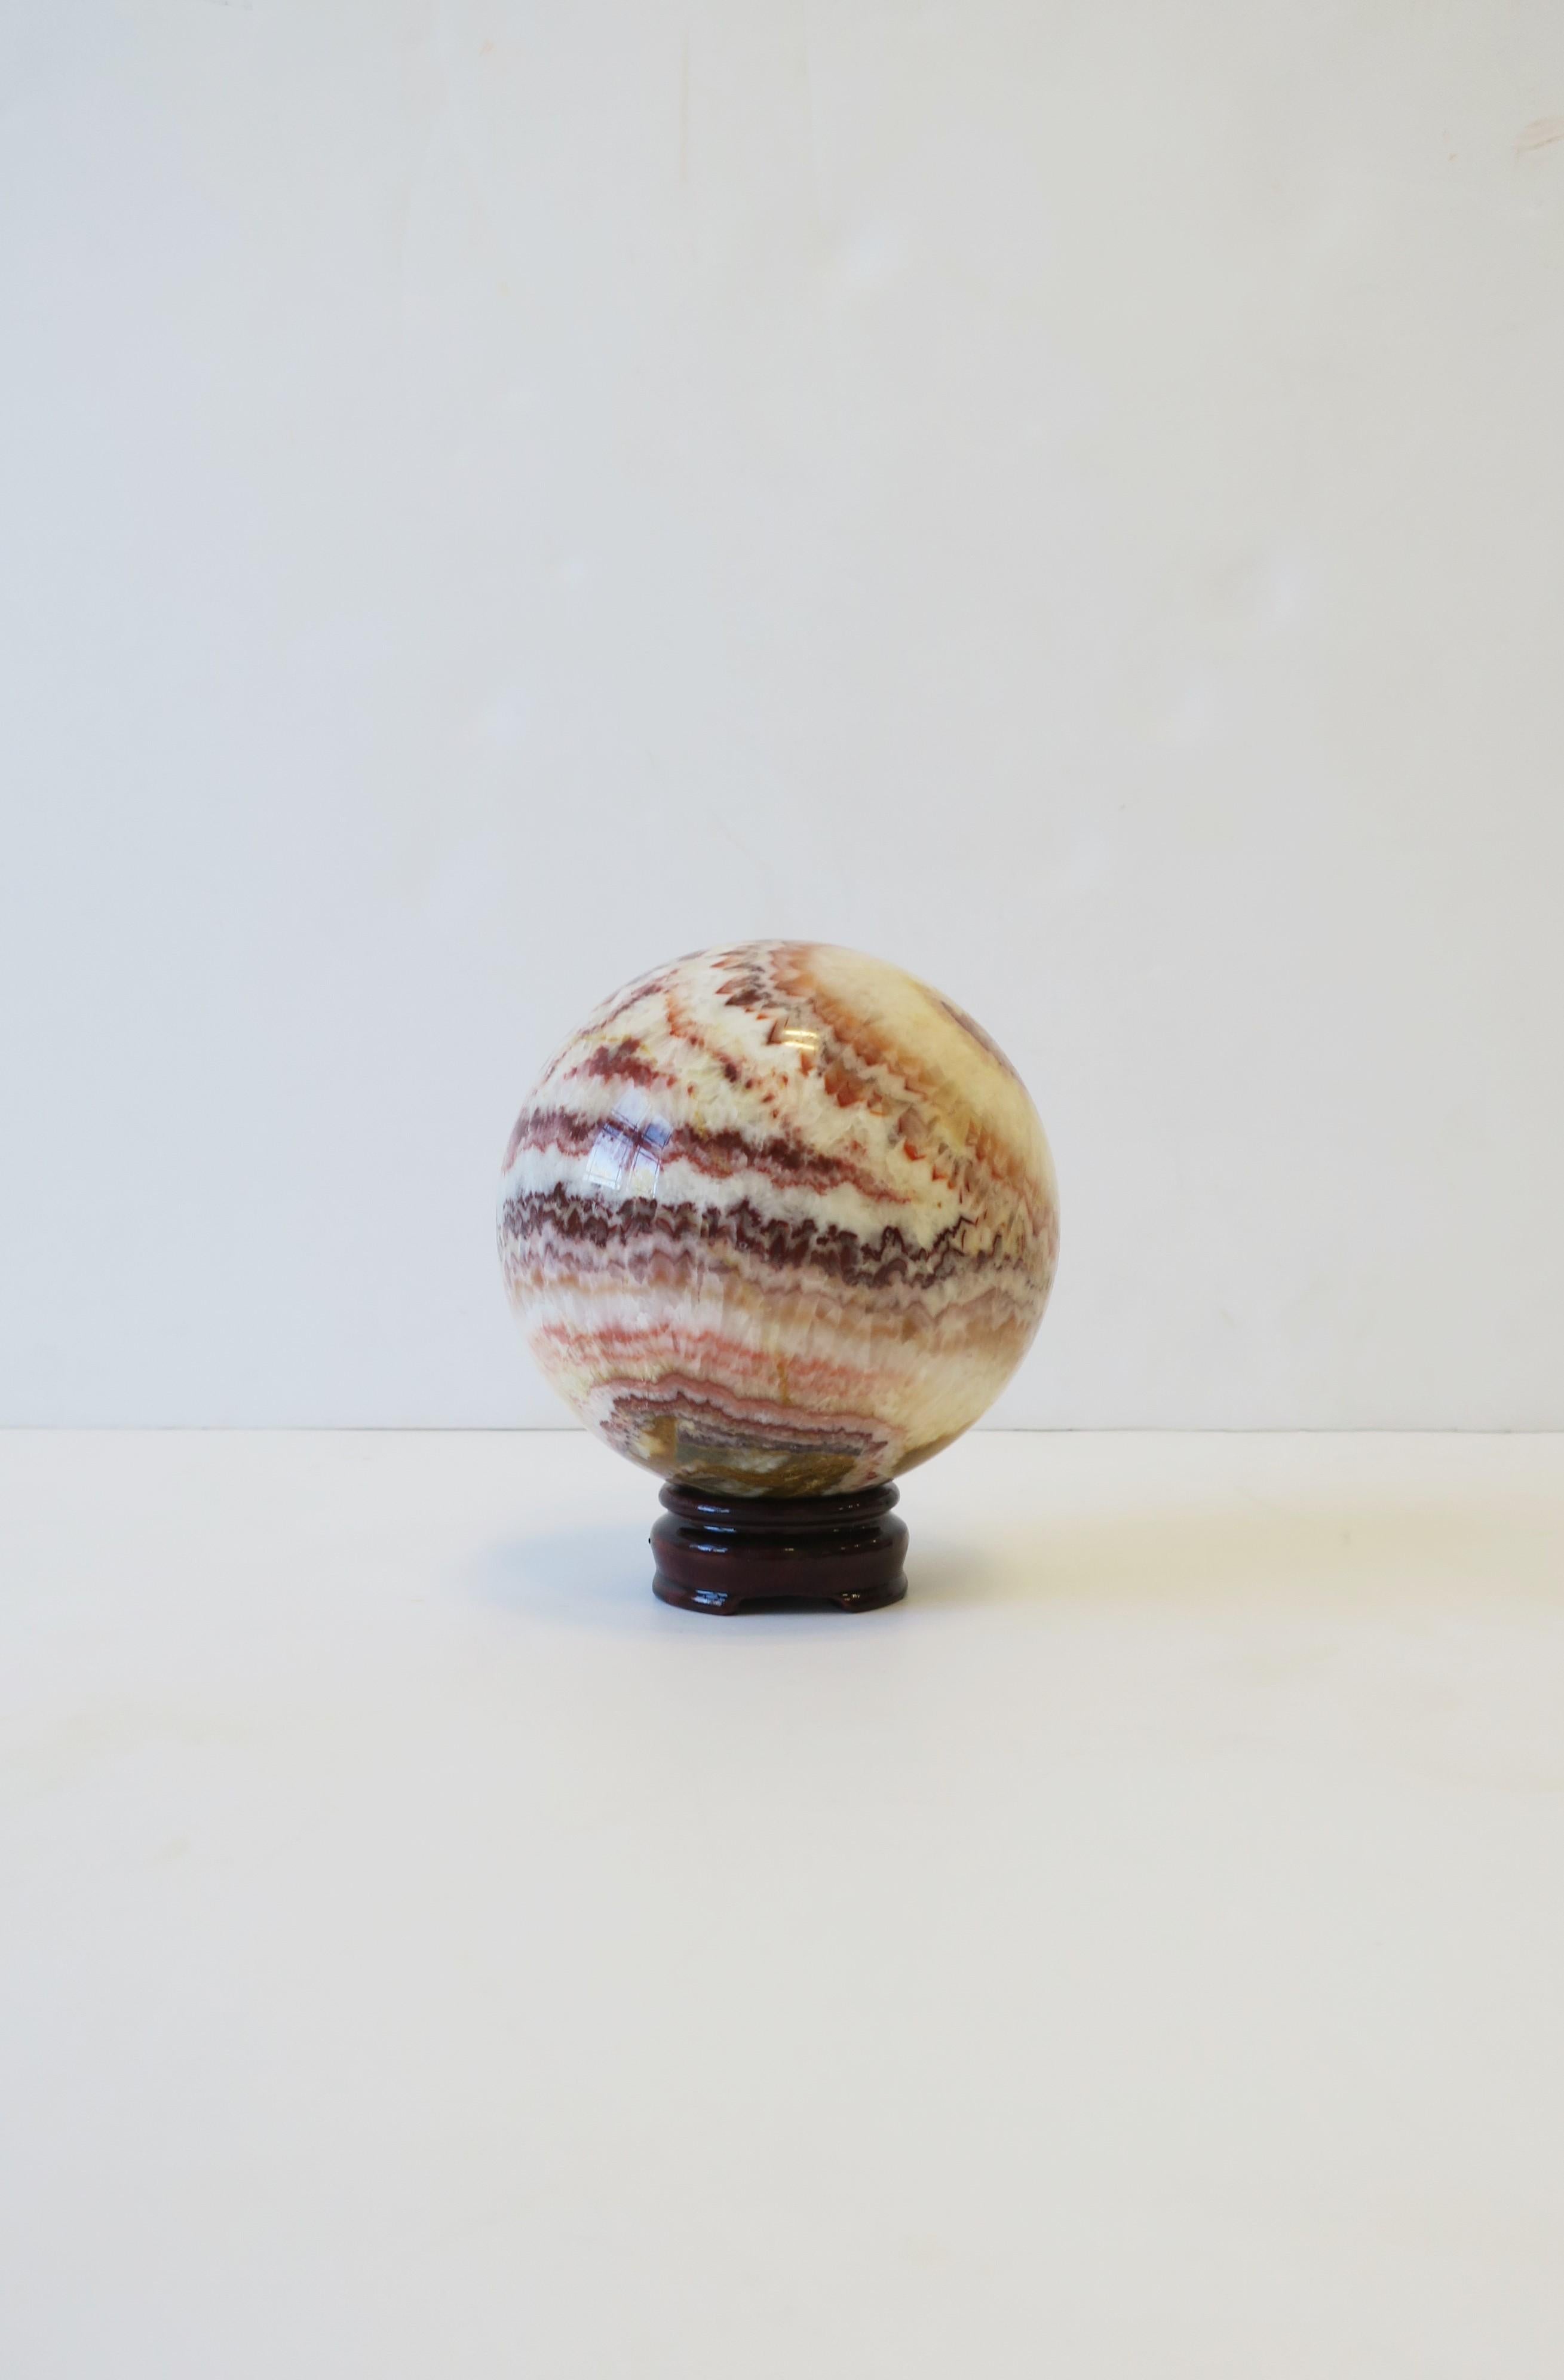 A beautiful and substantial vintage '70s Modern onyx marble sphere decorative object with wood stand, circa 1970s, late-20th century, Italy. Predominant colors hues include white, light red, red burgundy, with touches of yellow mustard.